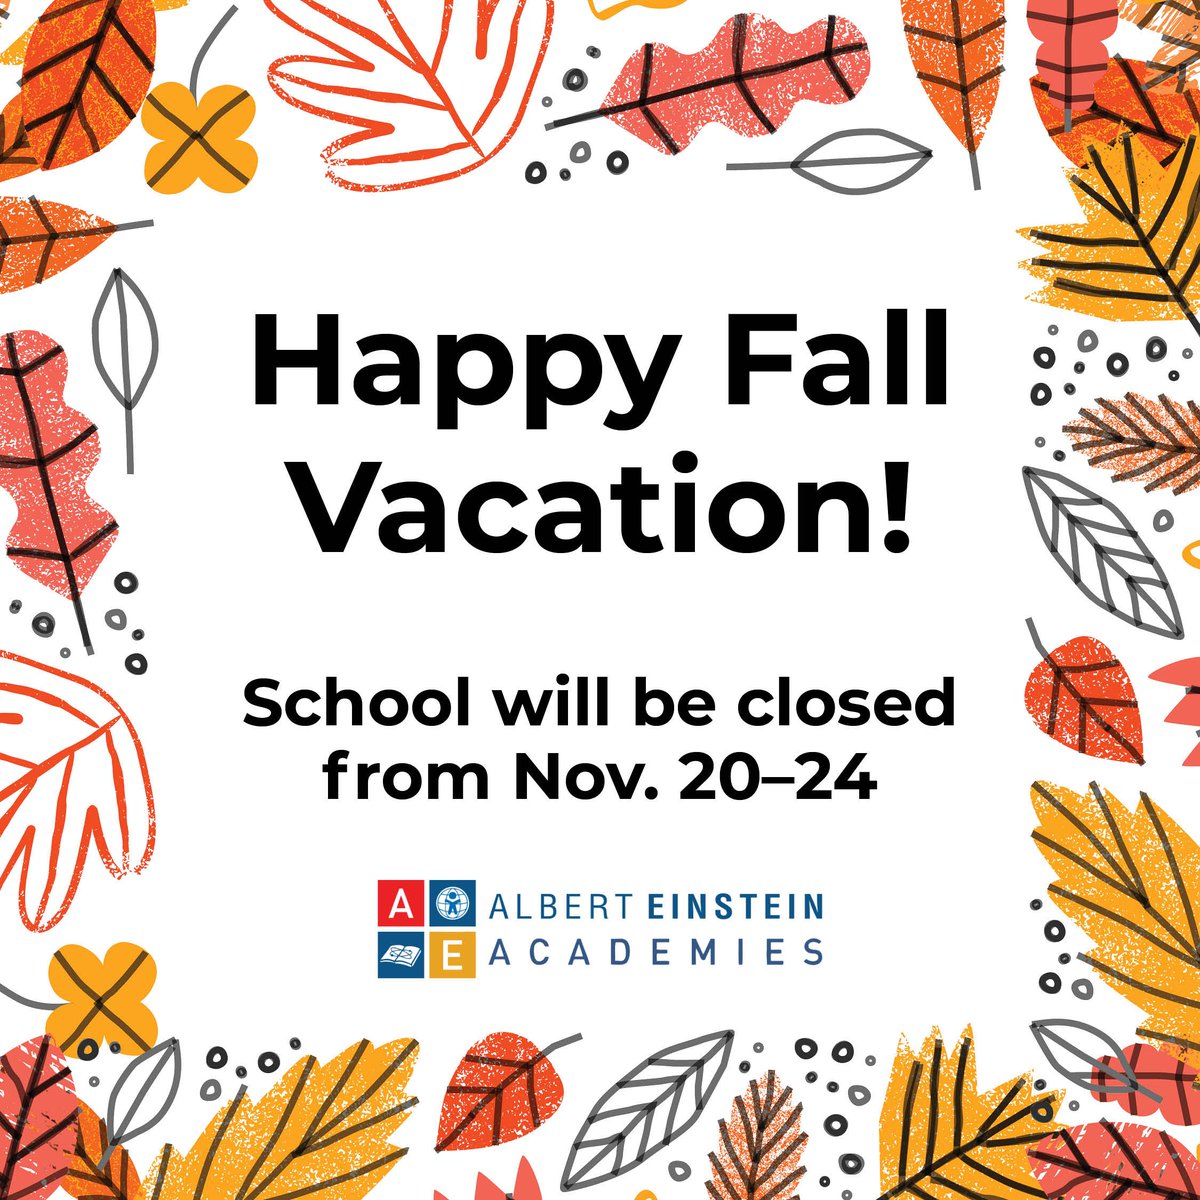 Don't forget, Fall Vacation is just around the corner, from Nov. 20–24. 🍂

Take this opportunity to spend quality time with your family and rejuvenate before the next term. We wish you a wonderful break!

#FallVacation #QualityTime #SanDiegoParents